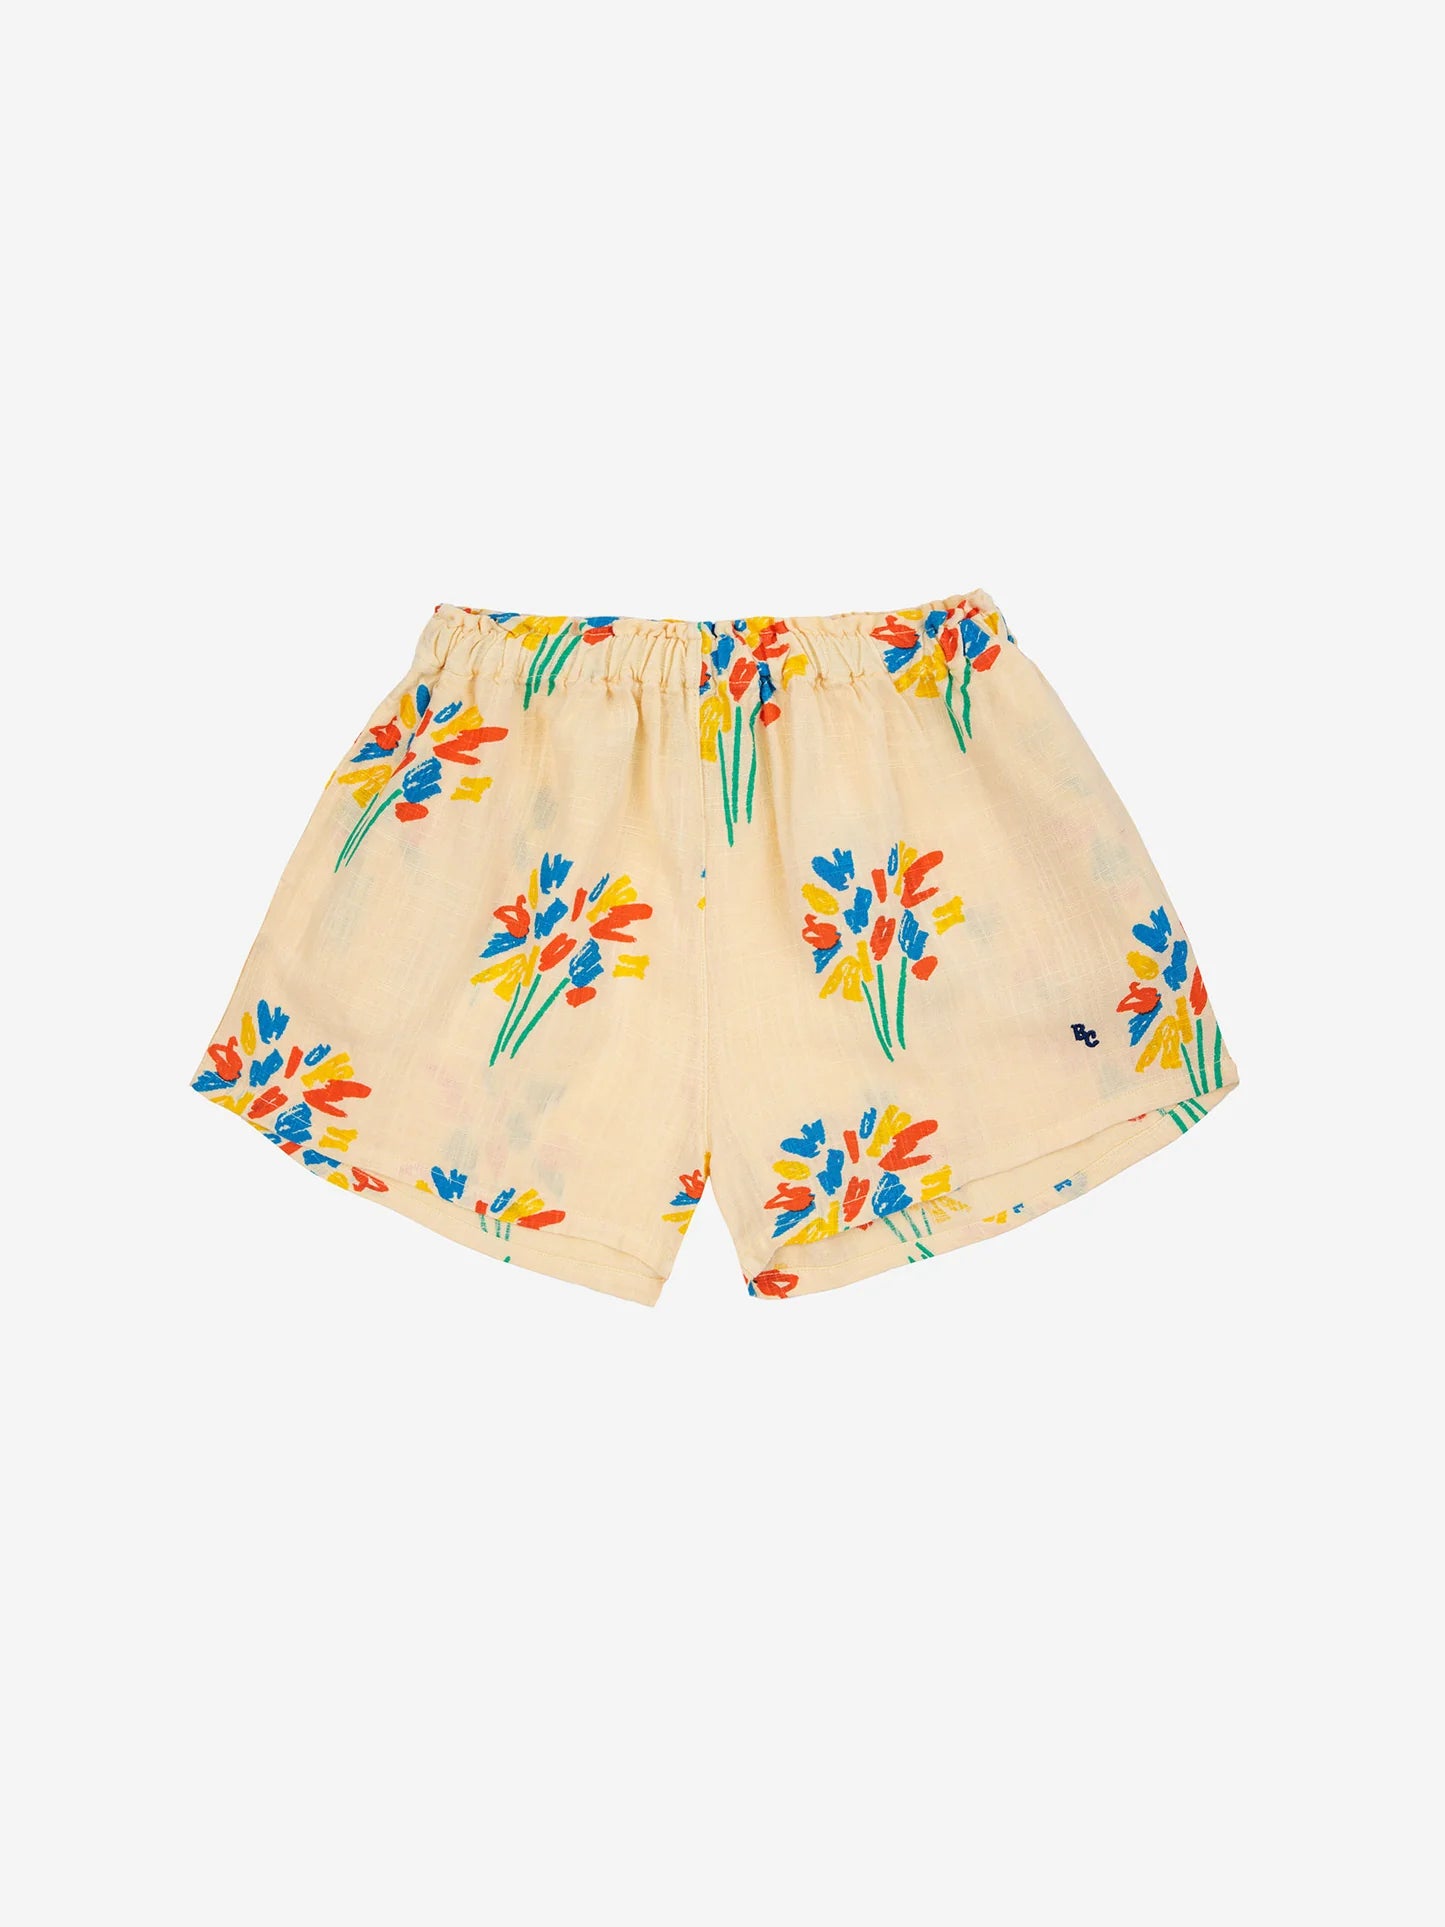 Fireworks All Over Woven Shorts by Bobo Choses.